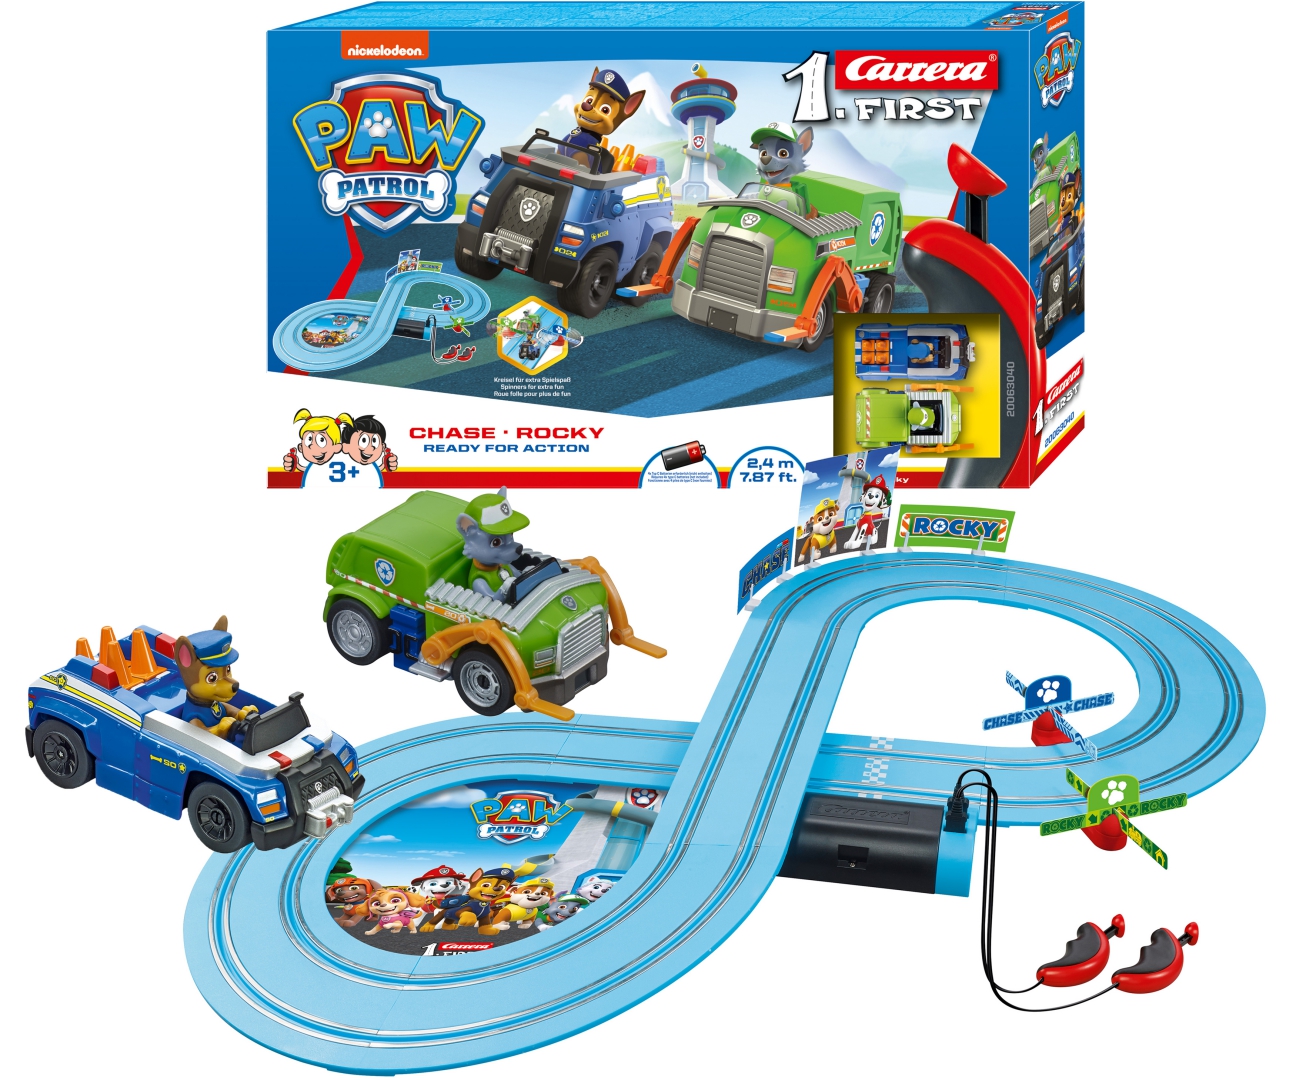 Carrera First 200 Paw Patrol - Ready for Action 2,4m